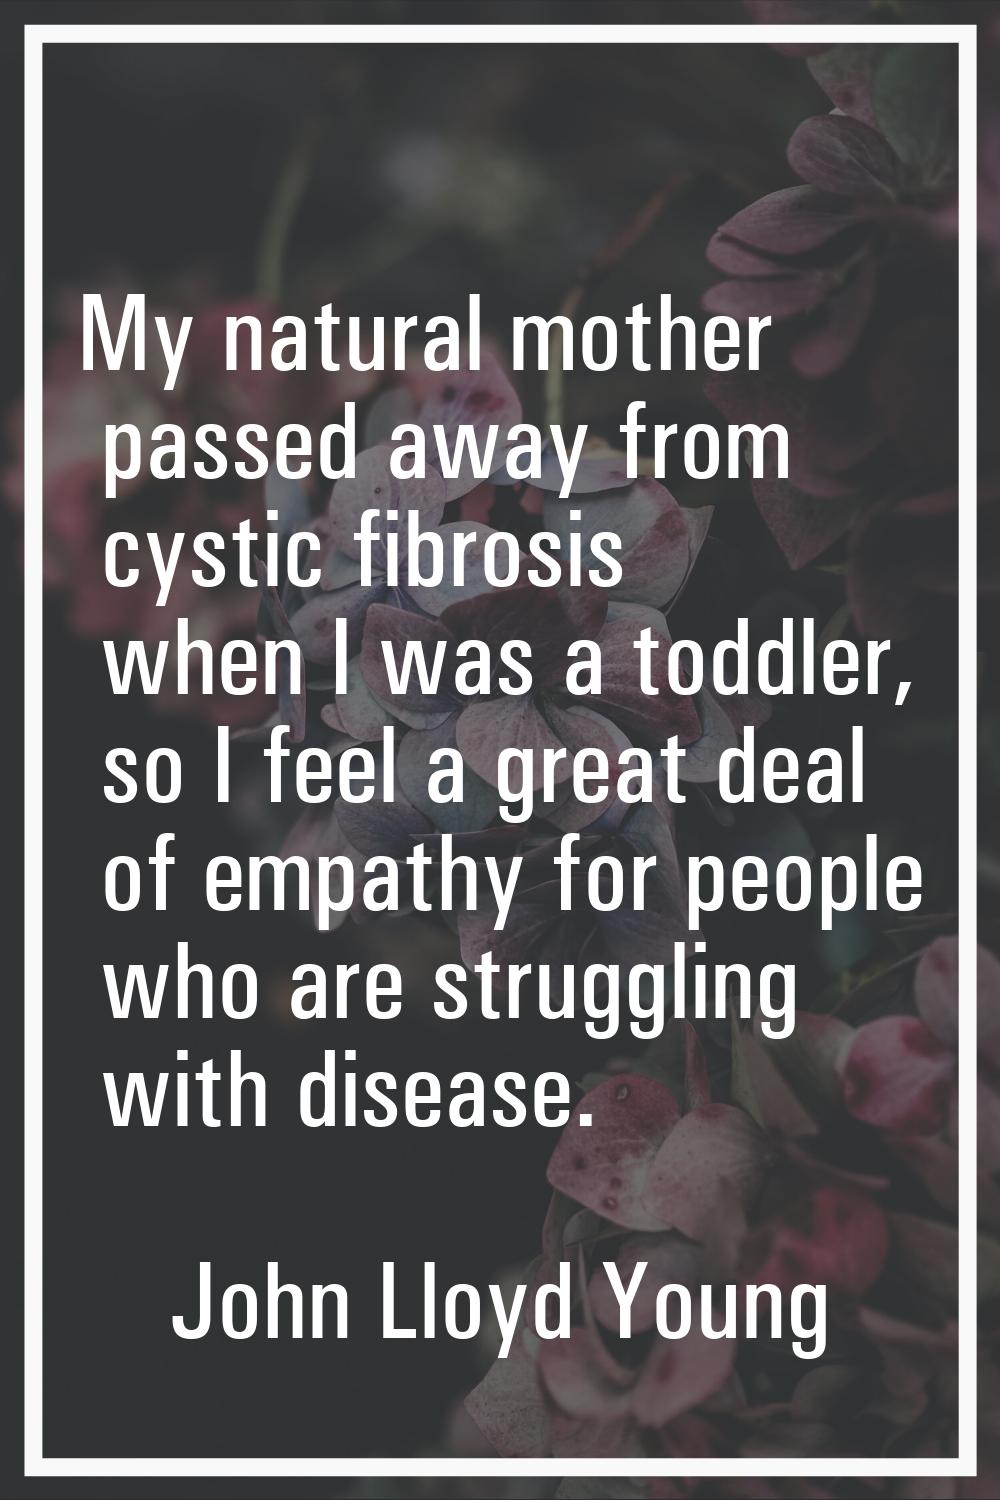 My natural mother passed away from cystic fibrosis when I was a toddler, so I feel a great deal of 